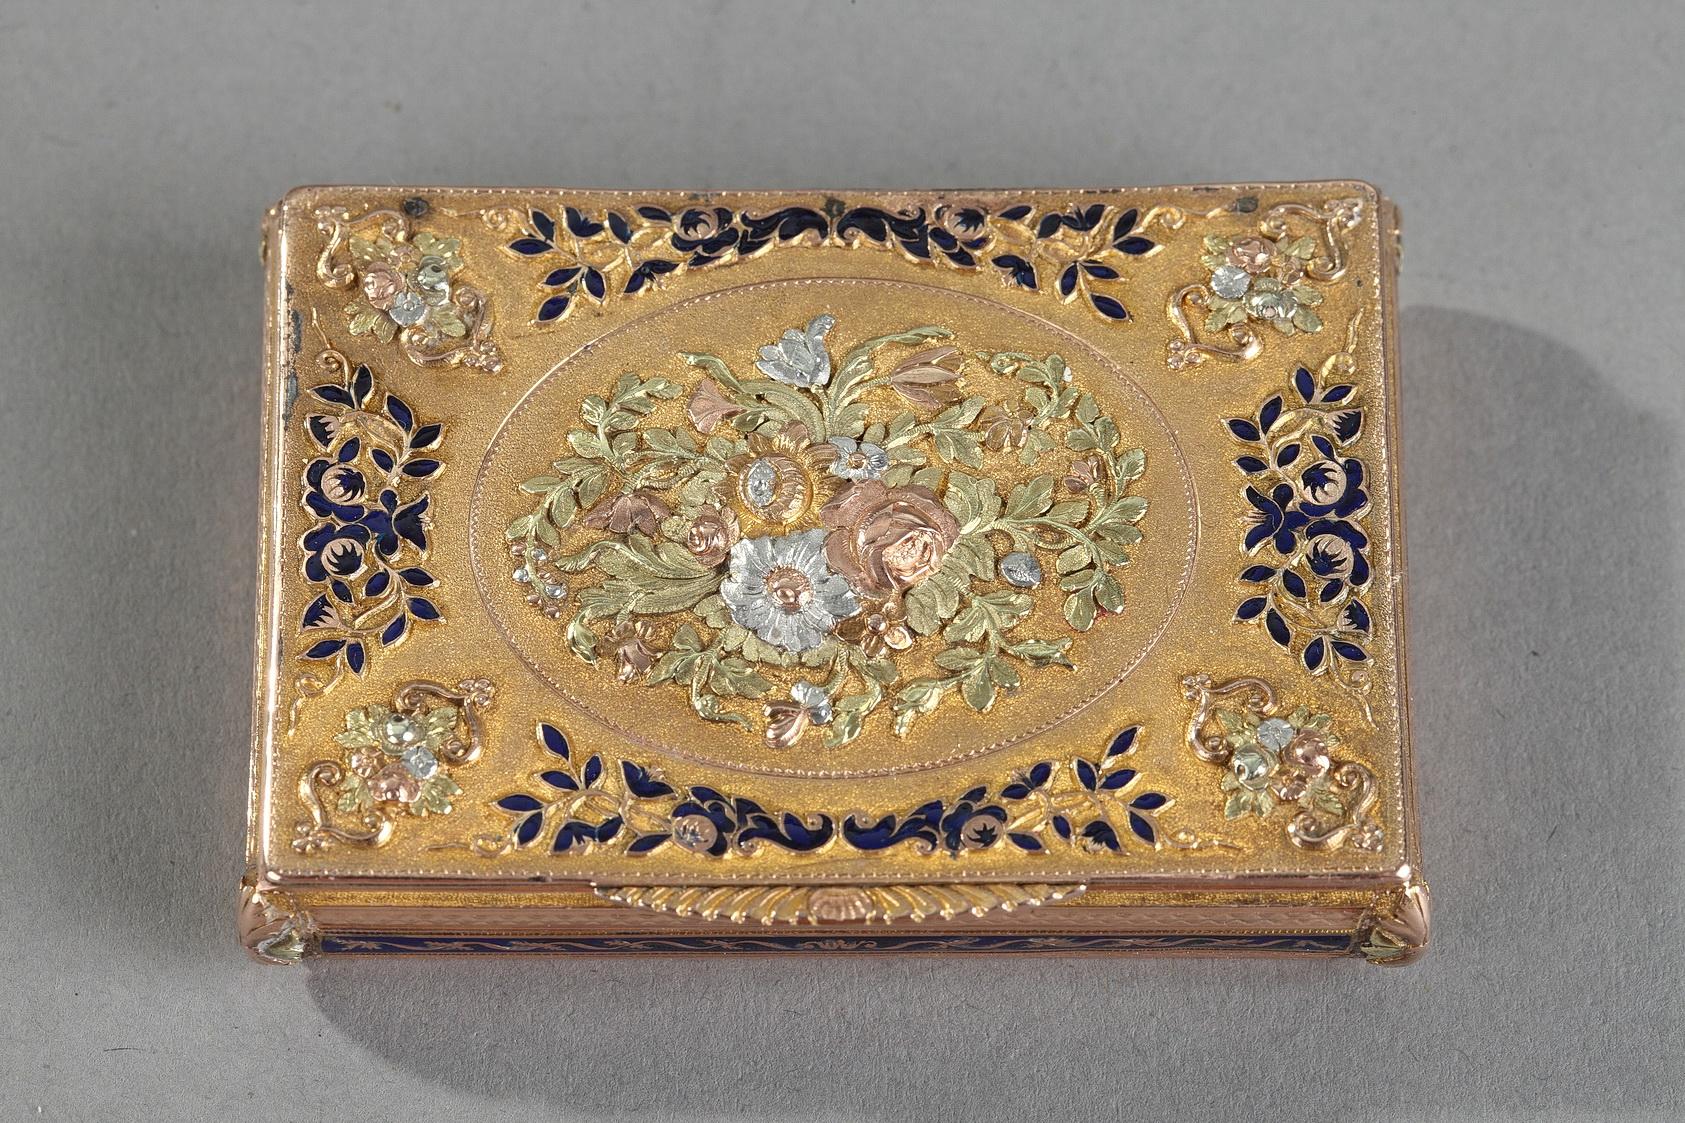 Rectangular box with three tones of gold and royal blue enamel. The hinged lid is embellished with a multicolored gold medallion in relief featuring a bouquet of roses and tulips, set on a matte gold background. Delicate foliage accented with royal